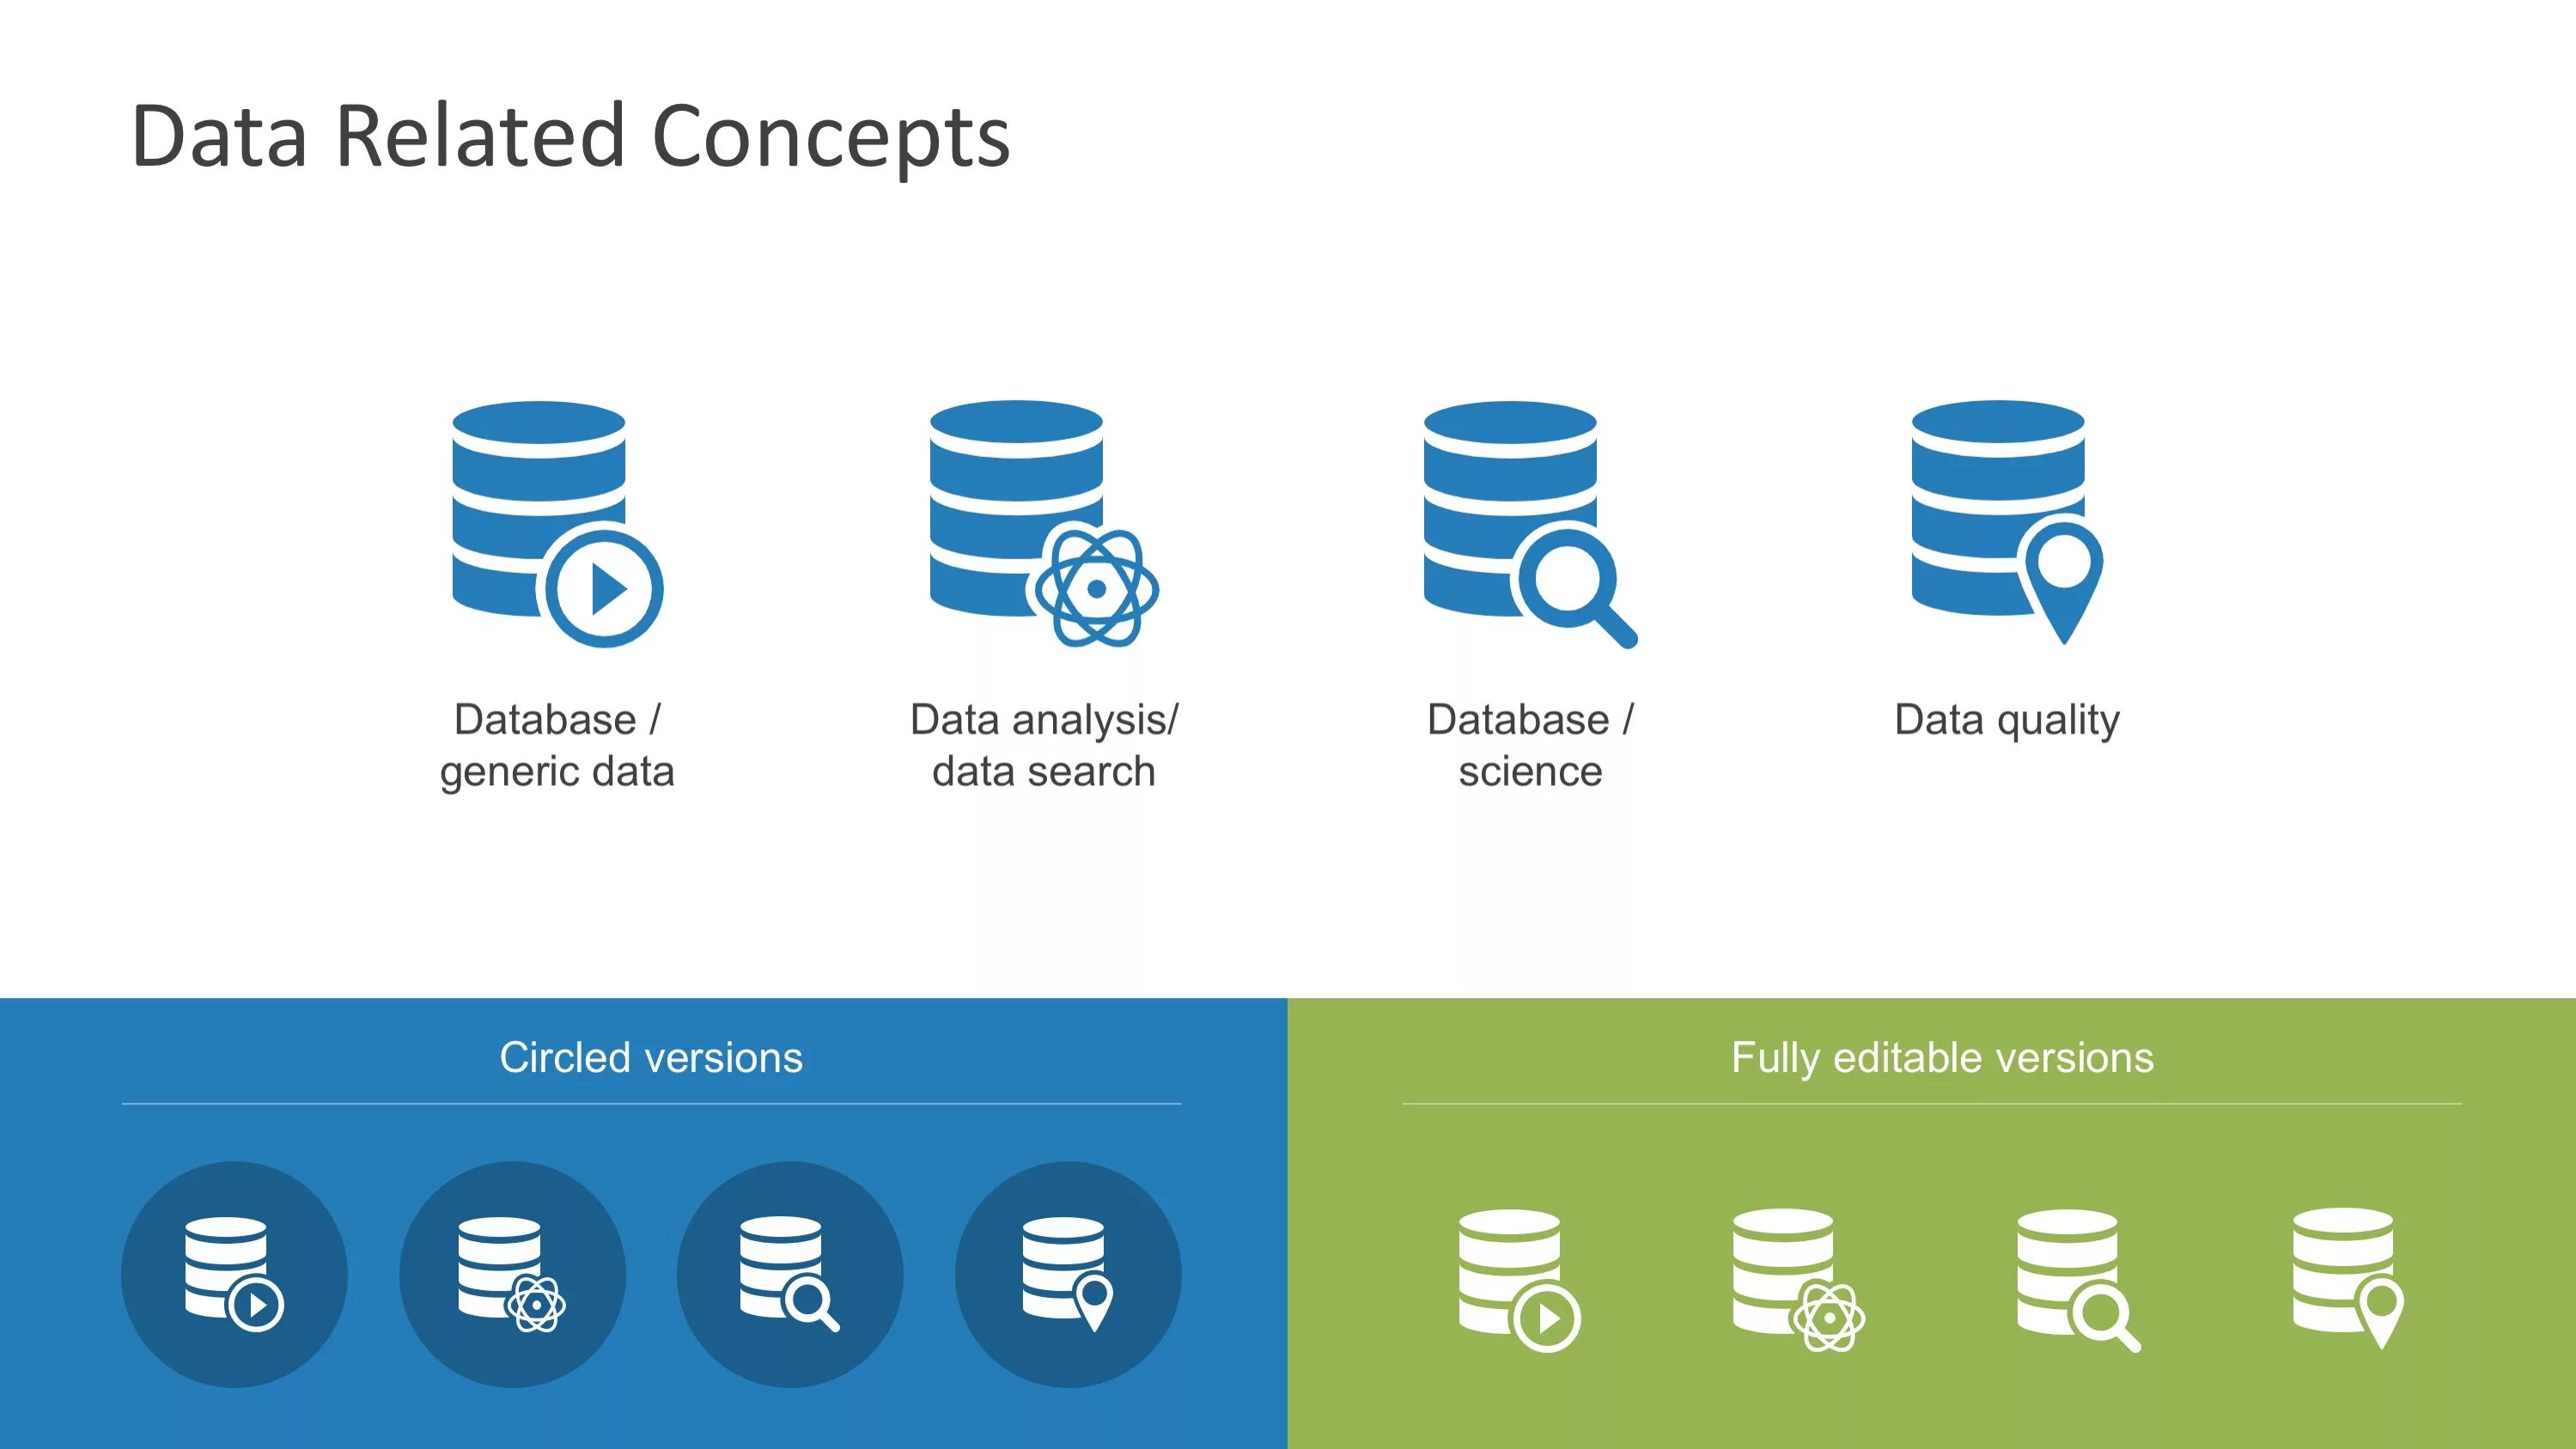 Database Concept. Database Analysis фон. Database Management Concepts. The main Concepts of databases. Related data